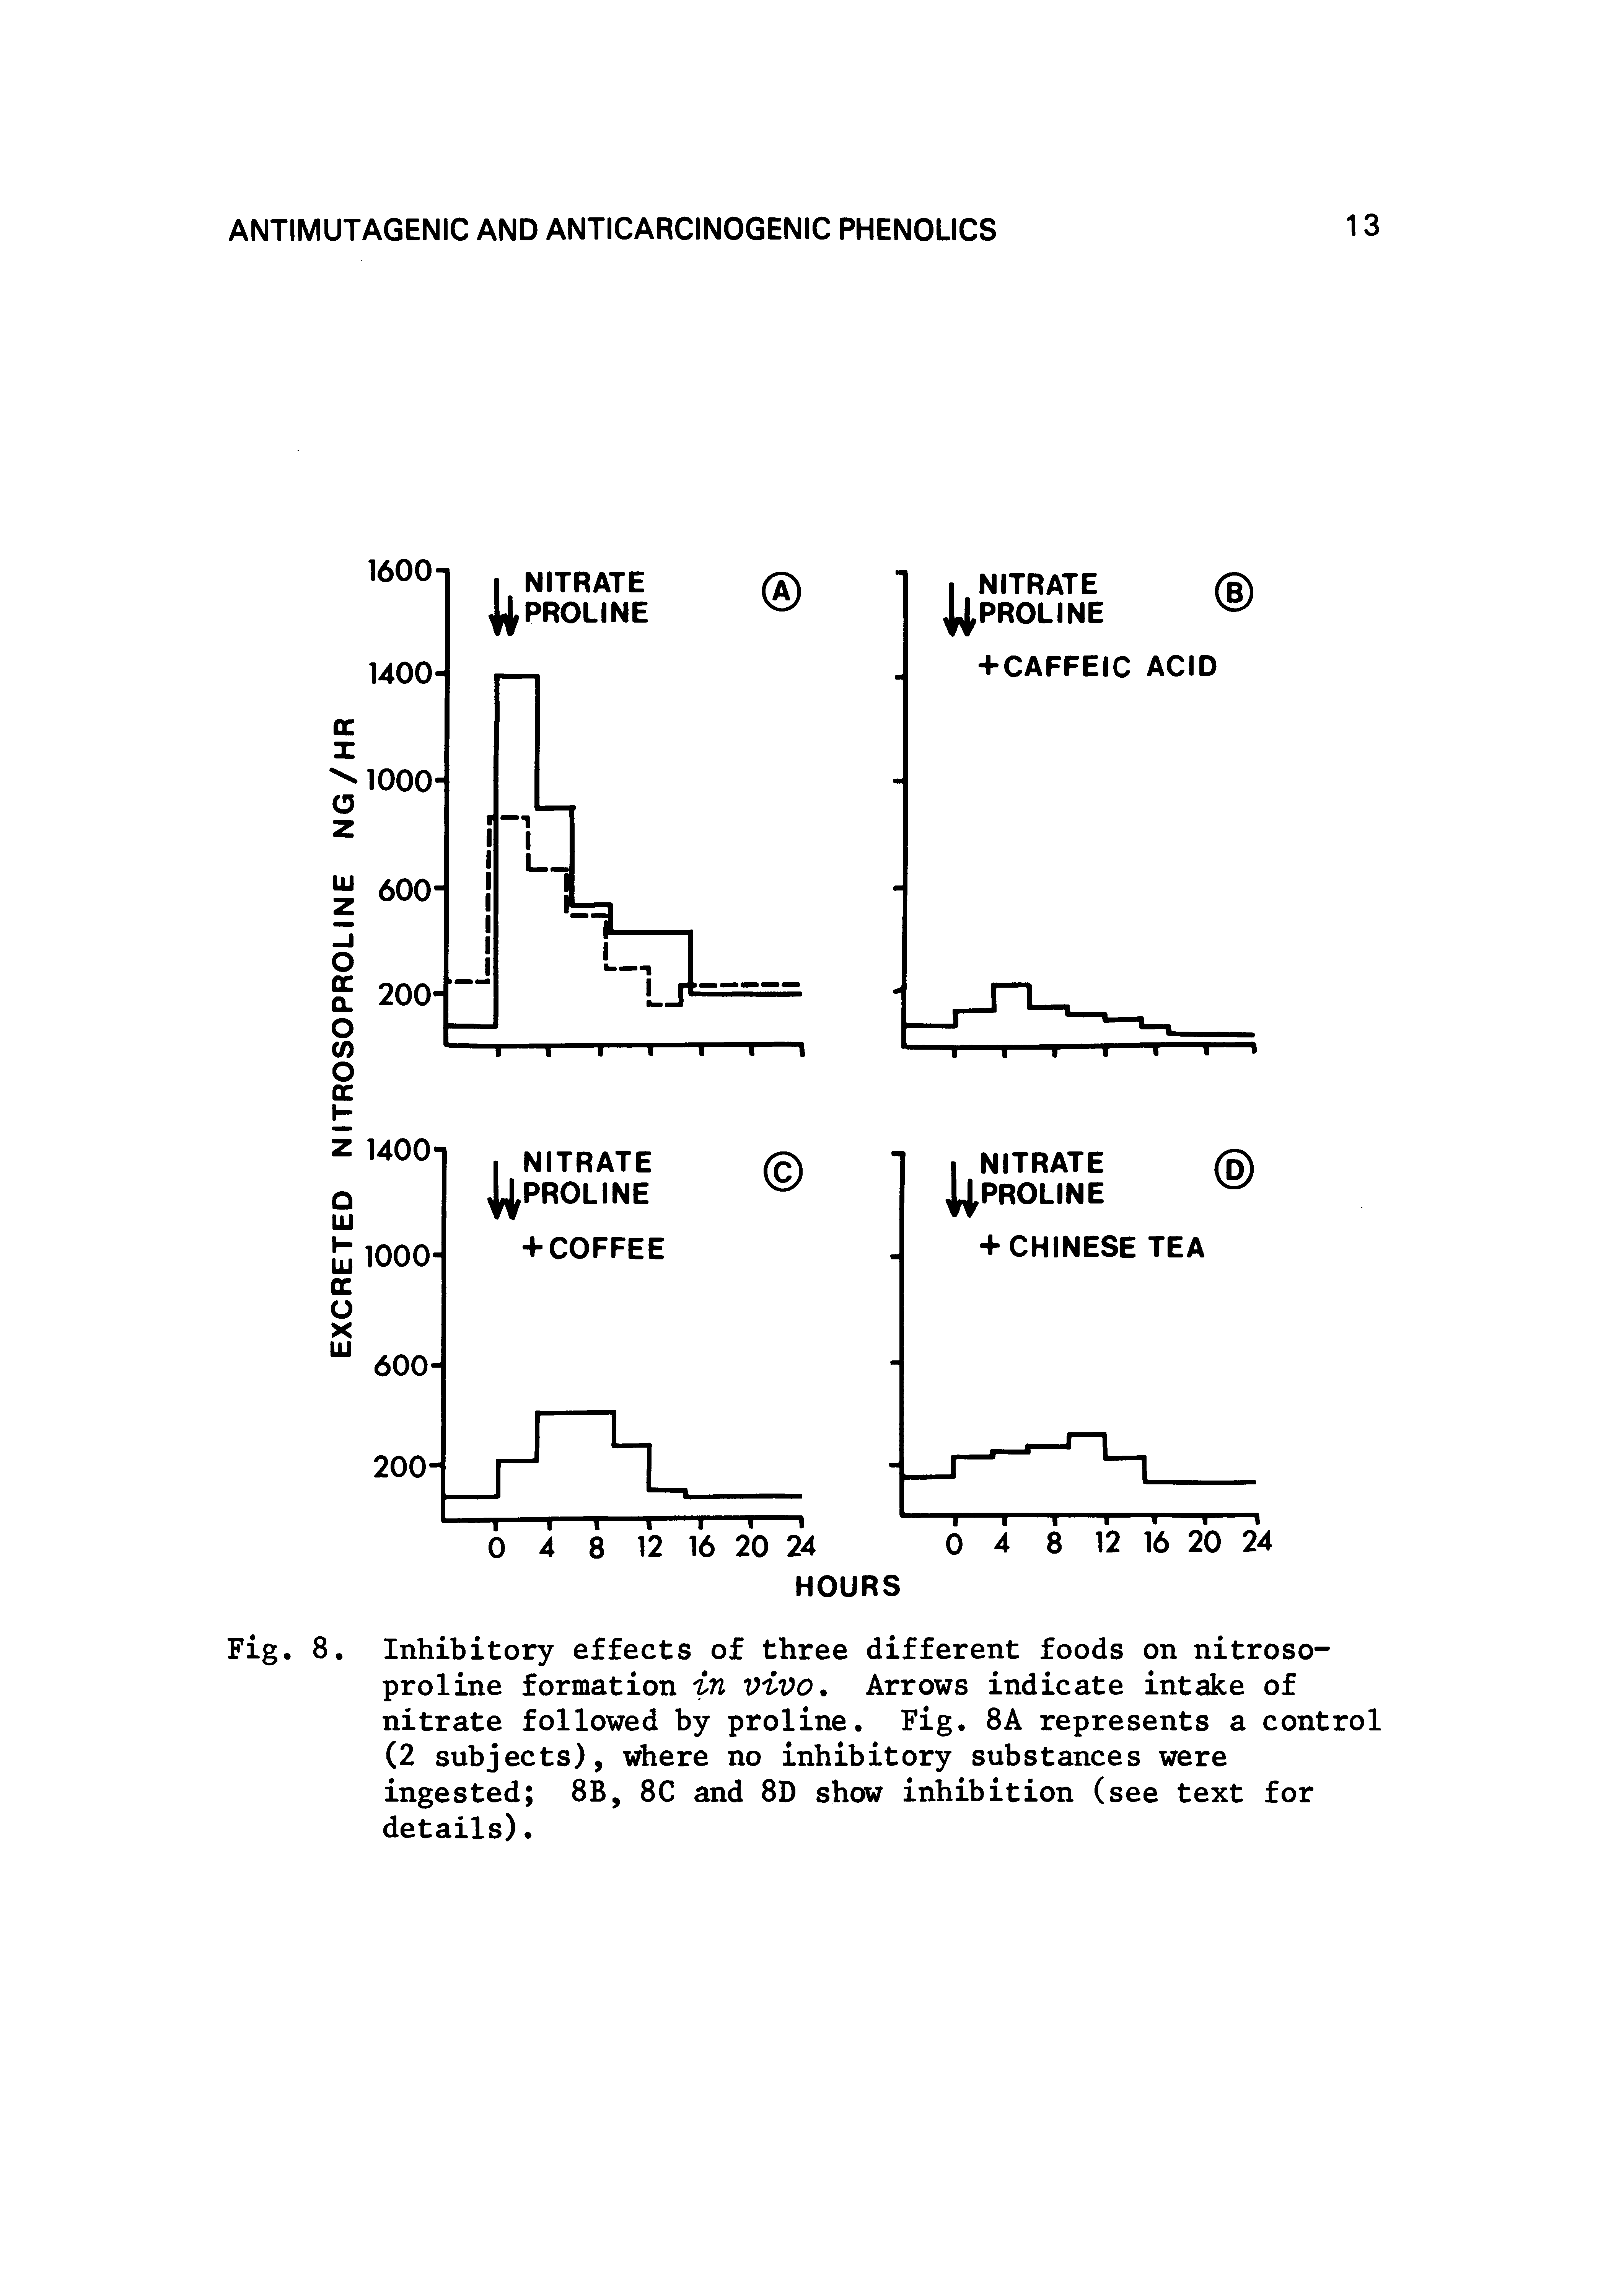 Fig. 8. Inhibitory effects of three different foods on nitroso-proline formation in vivo. Arrows indicate intake of nitrate followed by proline. Fig. 8A represents a control (2 subjects), where no inhibitory substances were ingested 8B, 8C and 8D show inhibition (see text for details).